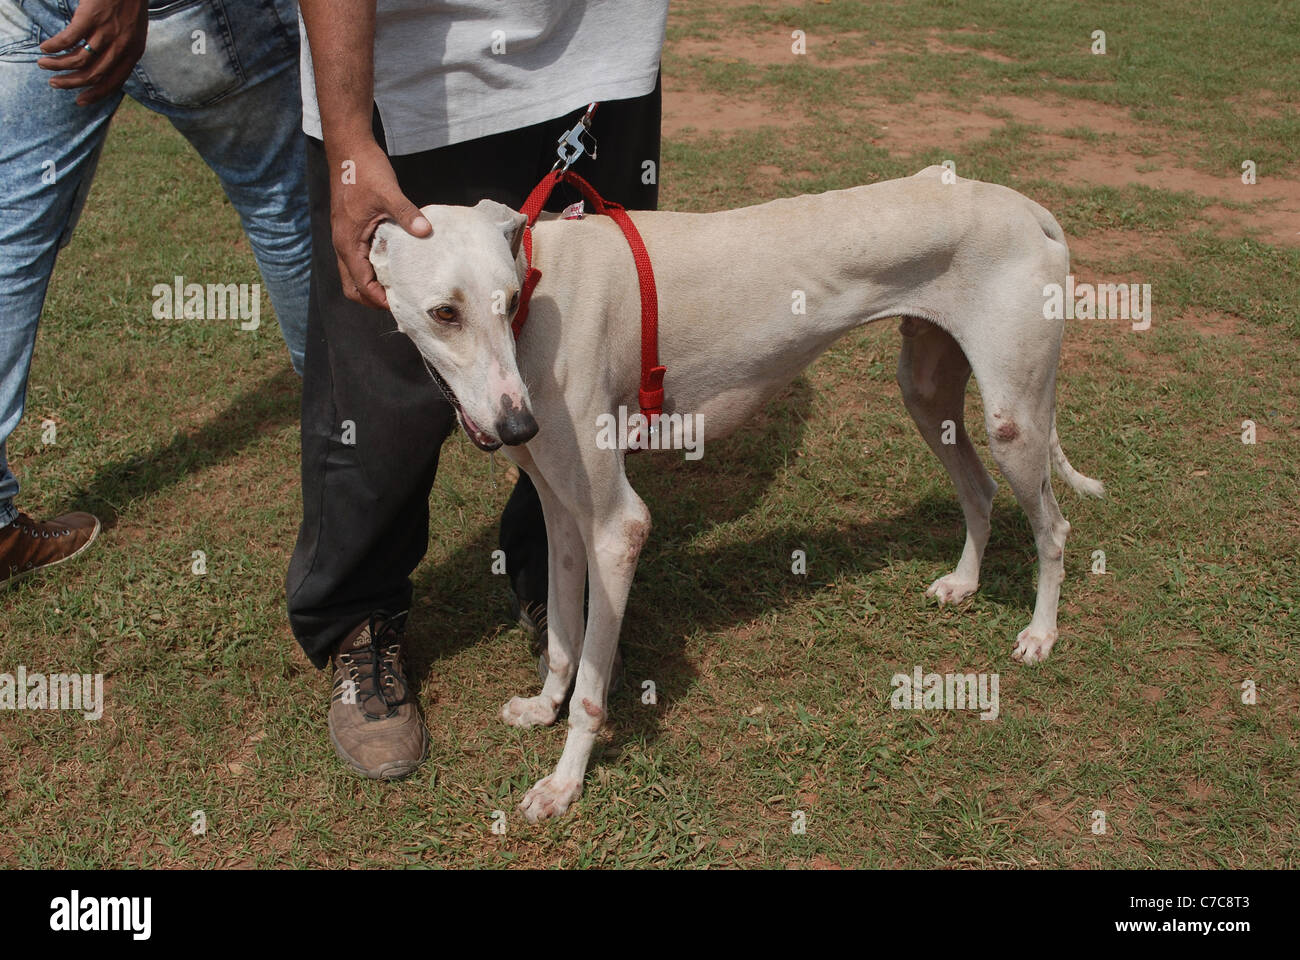 Mudhol Hound An Indian Breed Of Dog Of The Sight Hound Type It Is Stock Photo Alamy